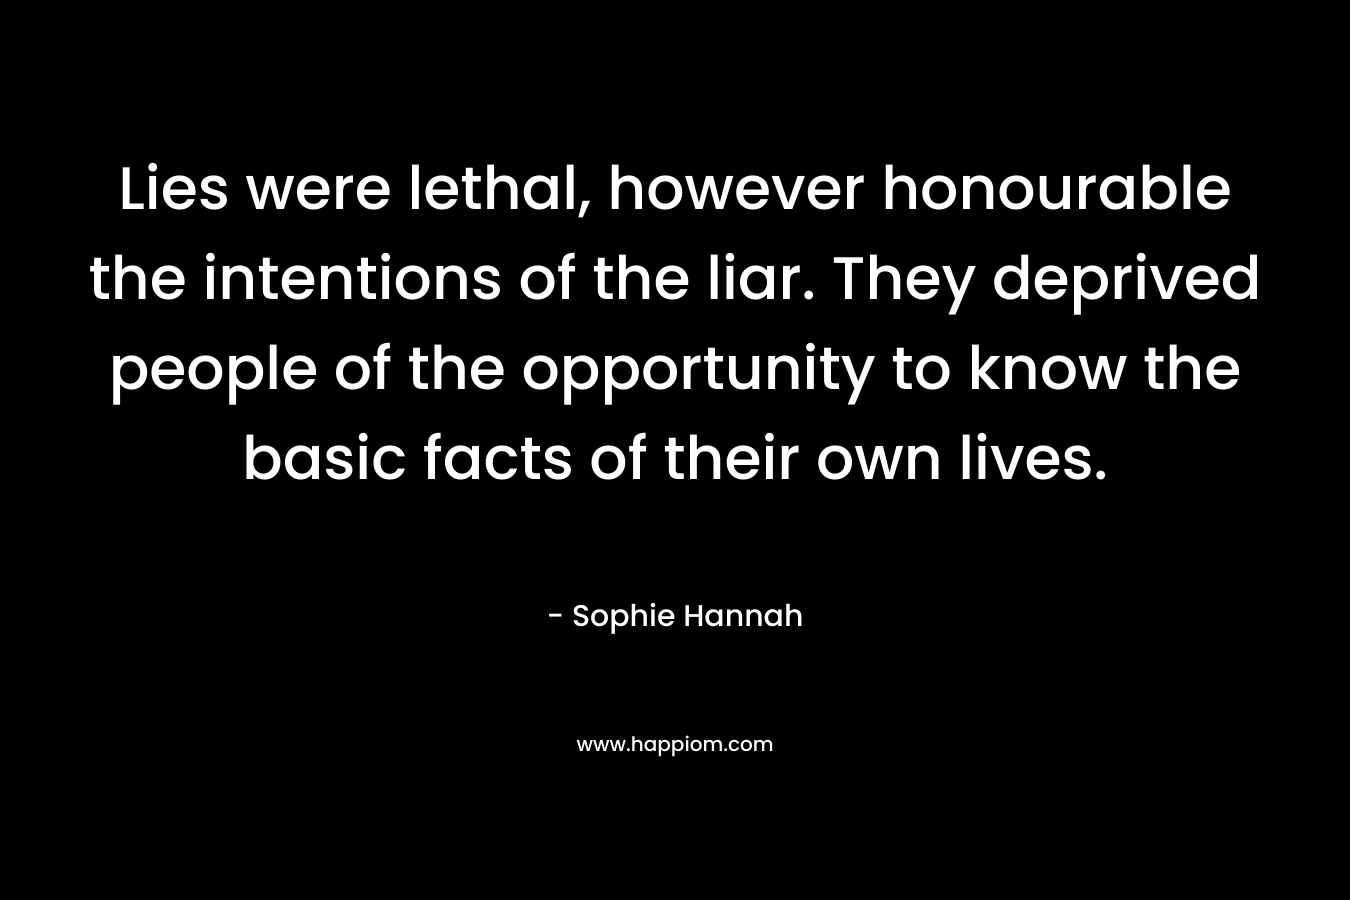 Lies were lethal, however honourable the intentions of the liar. They deprived people of the opportunity to know the basic facts of their own lives.  – Sophie Hannah